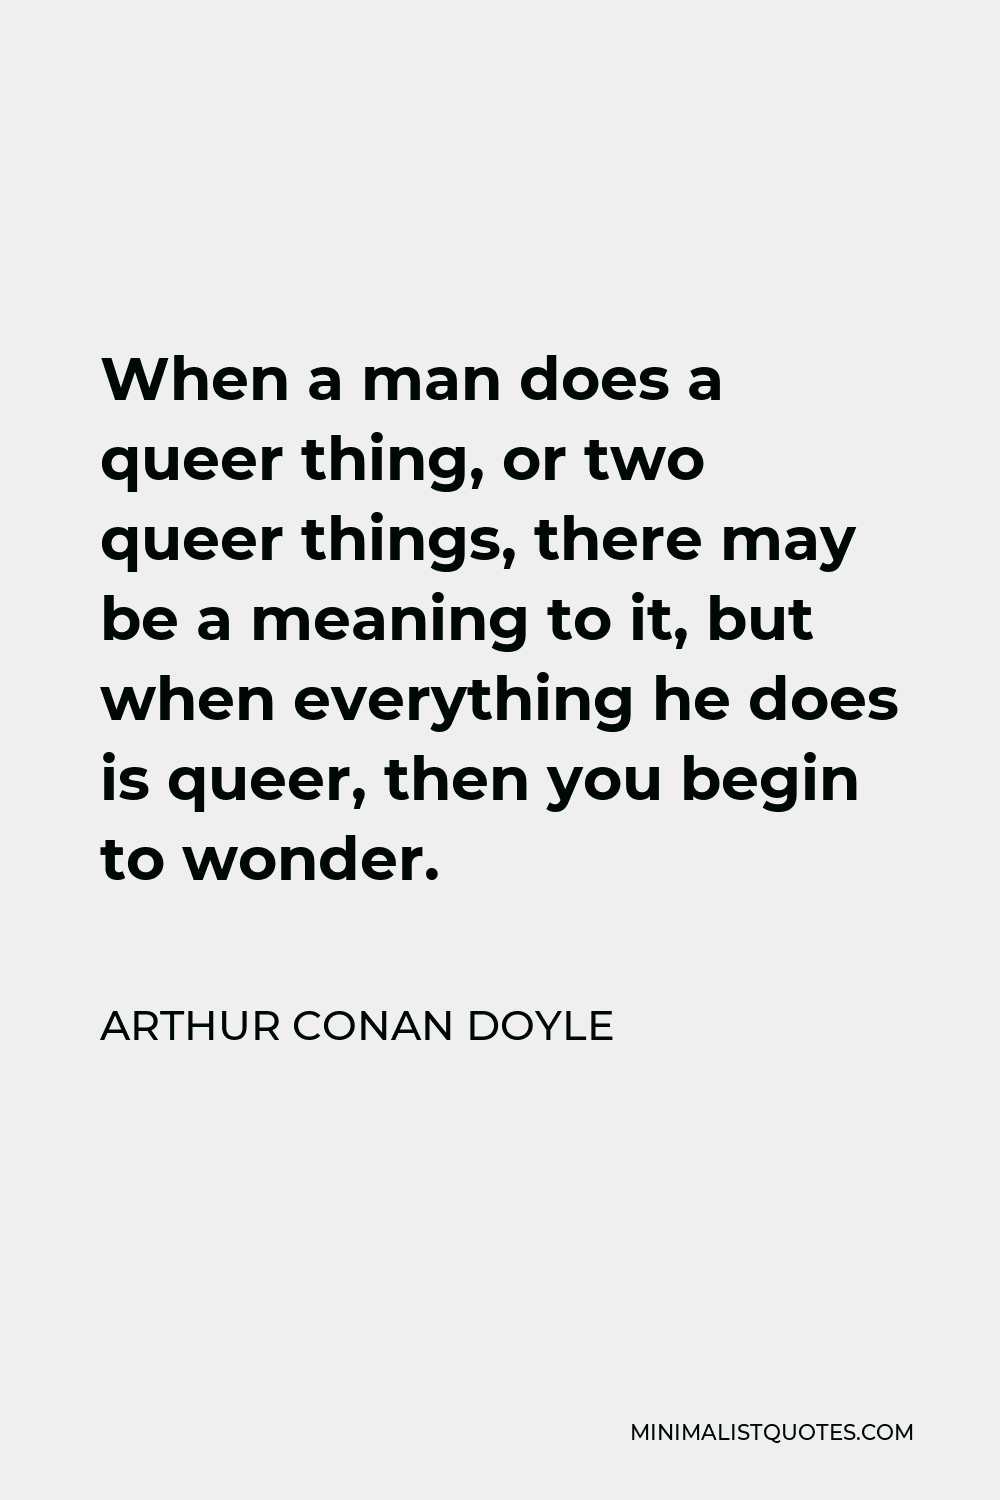 Arthur Conan Doyle Quote - When a man does a queer thing, or two queer things, there may be a meaning to it, but when everything he does is queer, then you begin to wonder.